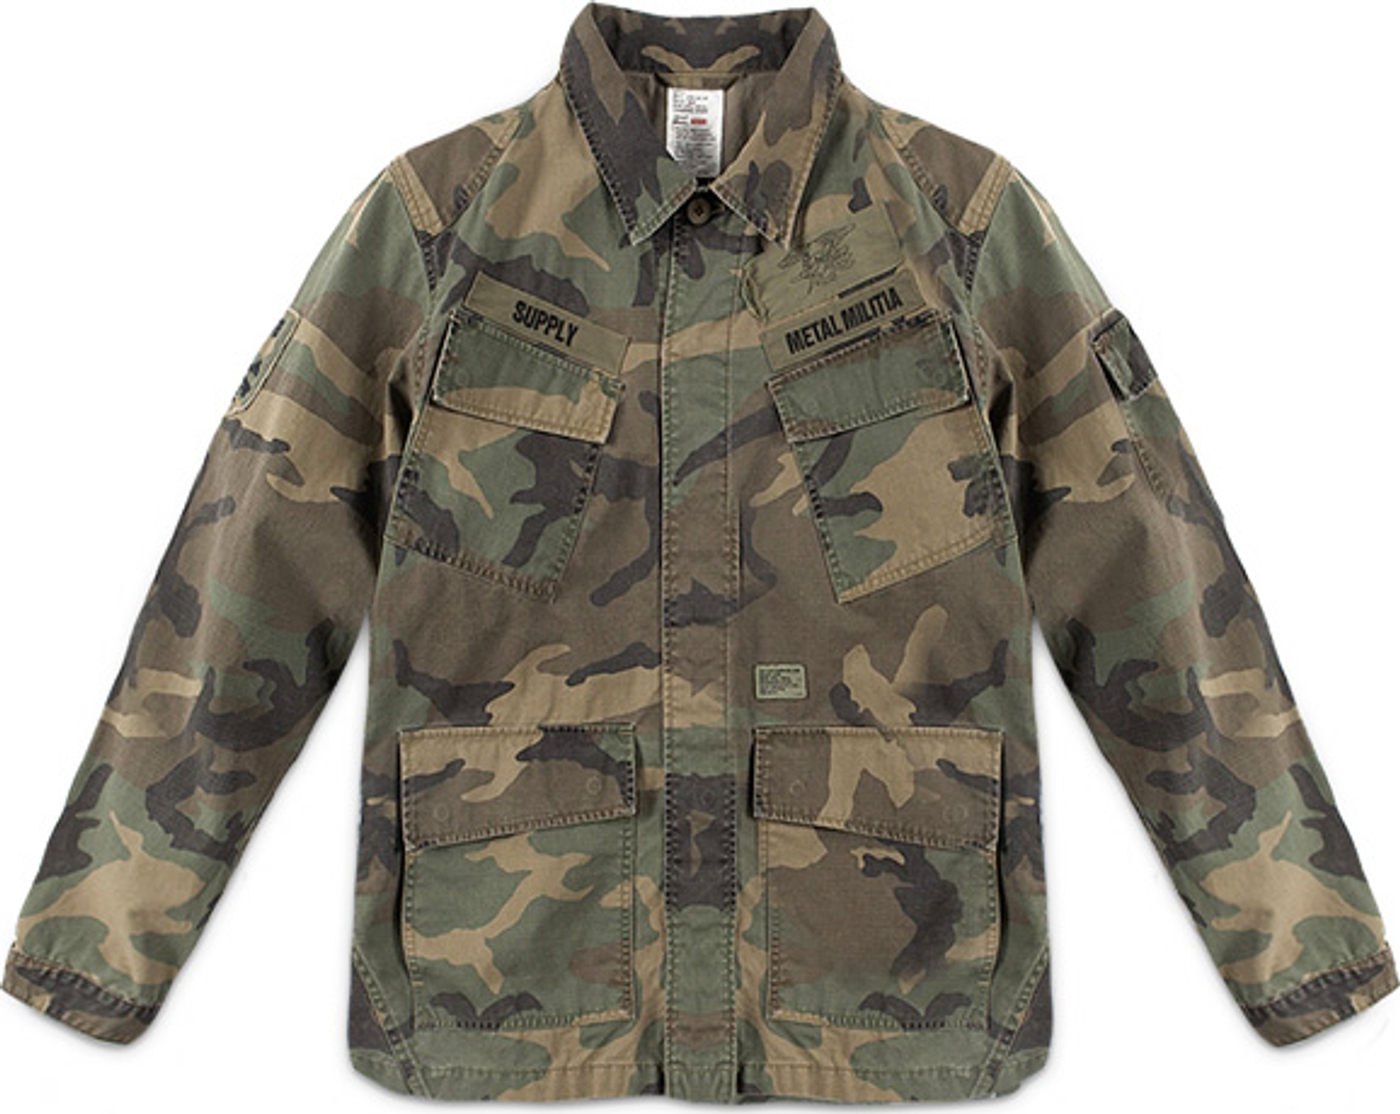 Military Jacket 
All cotton. (6/12)